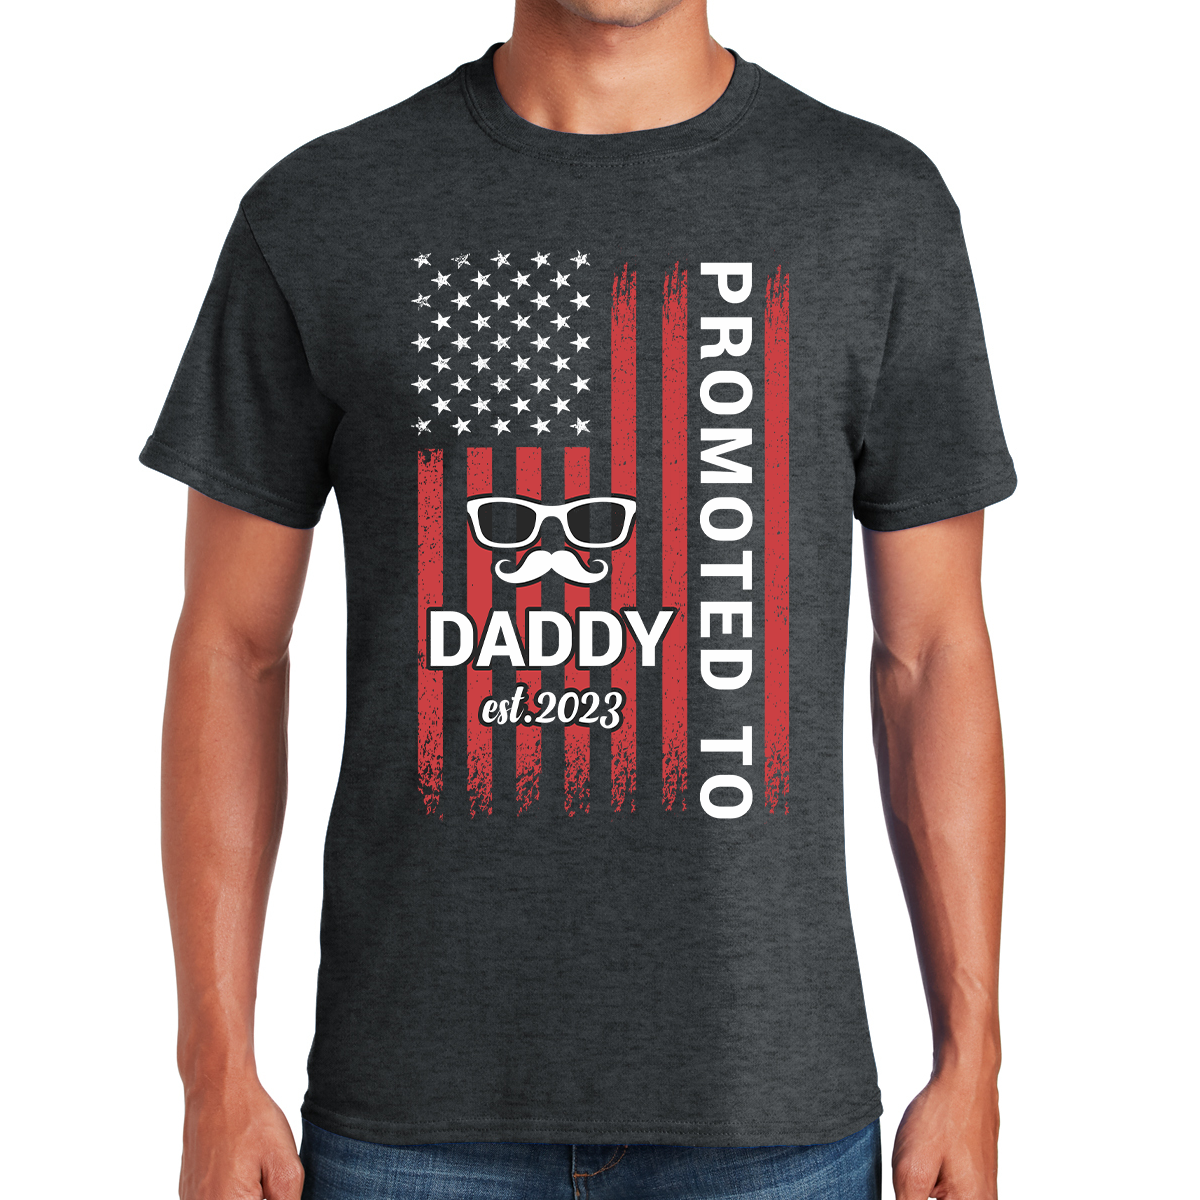 Promoted To Daddy Est. 2023 The Adventure Begins Awesome Dad T-shirt